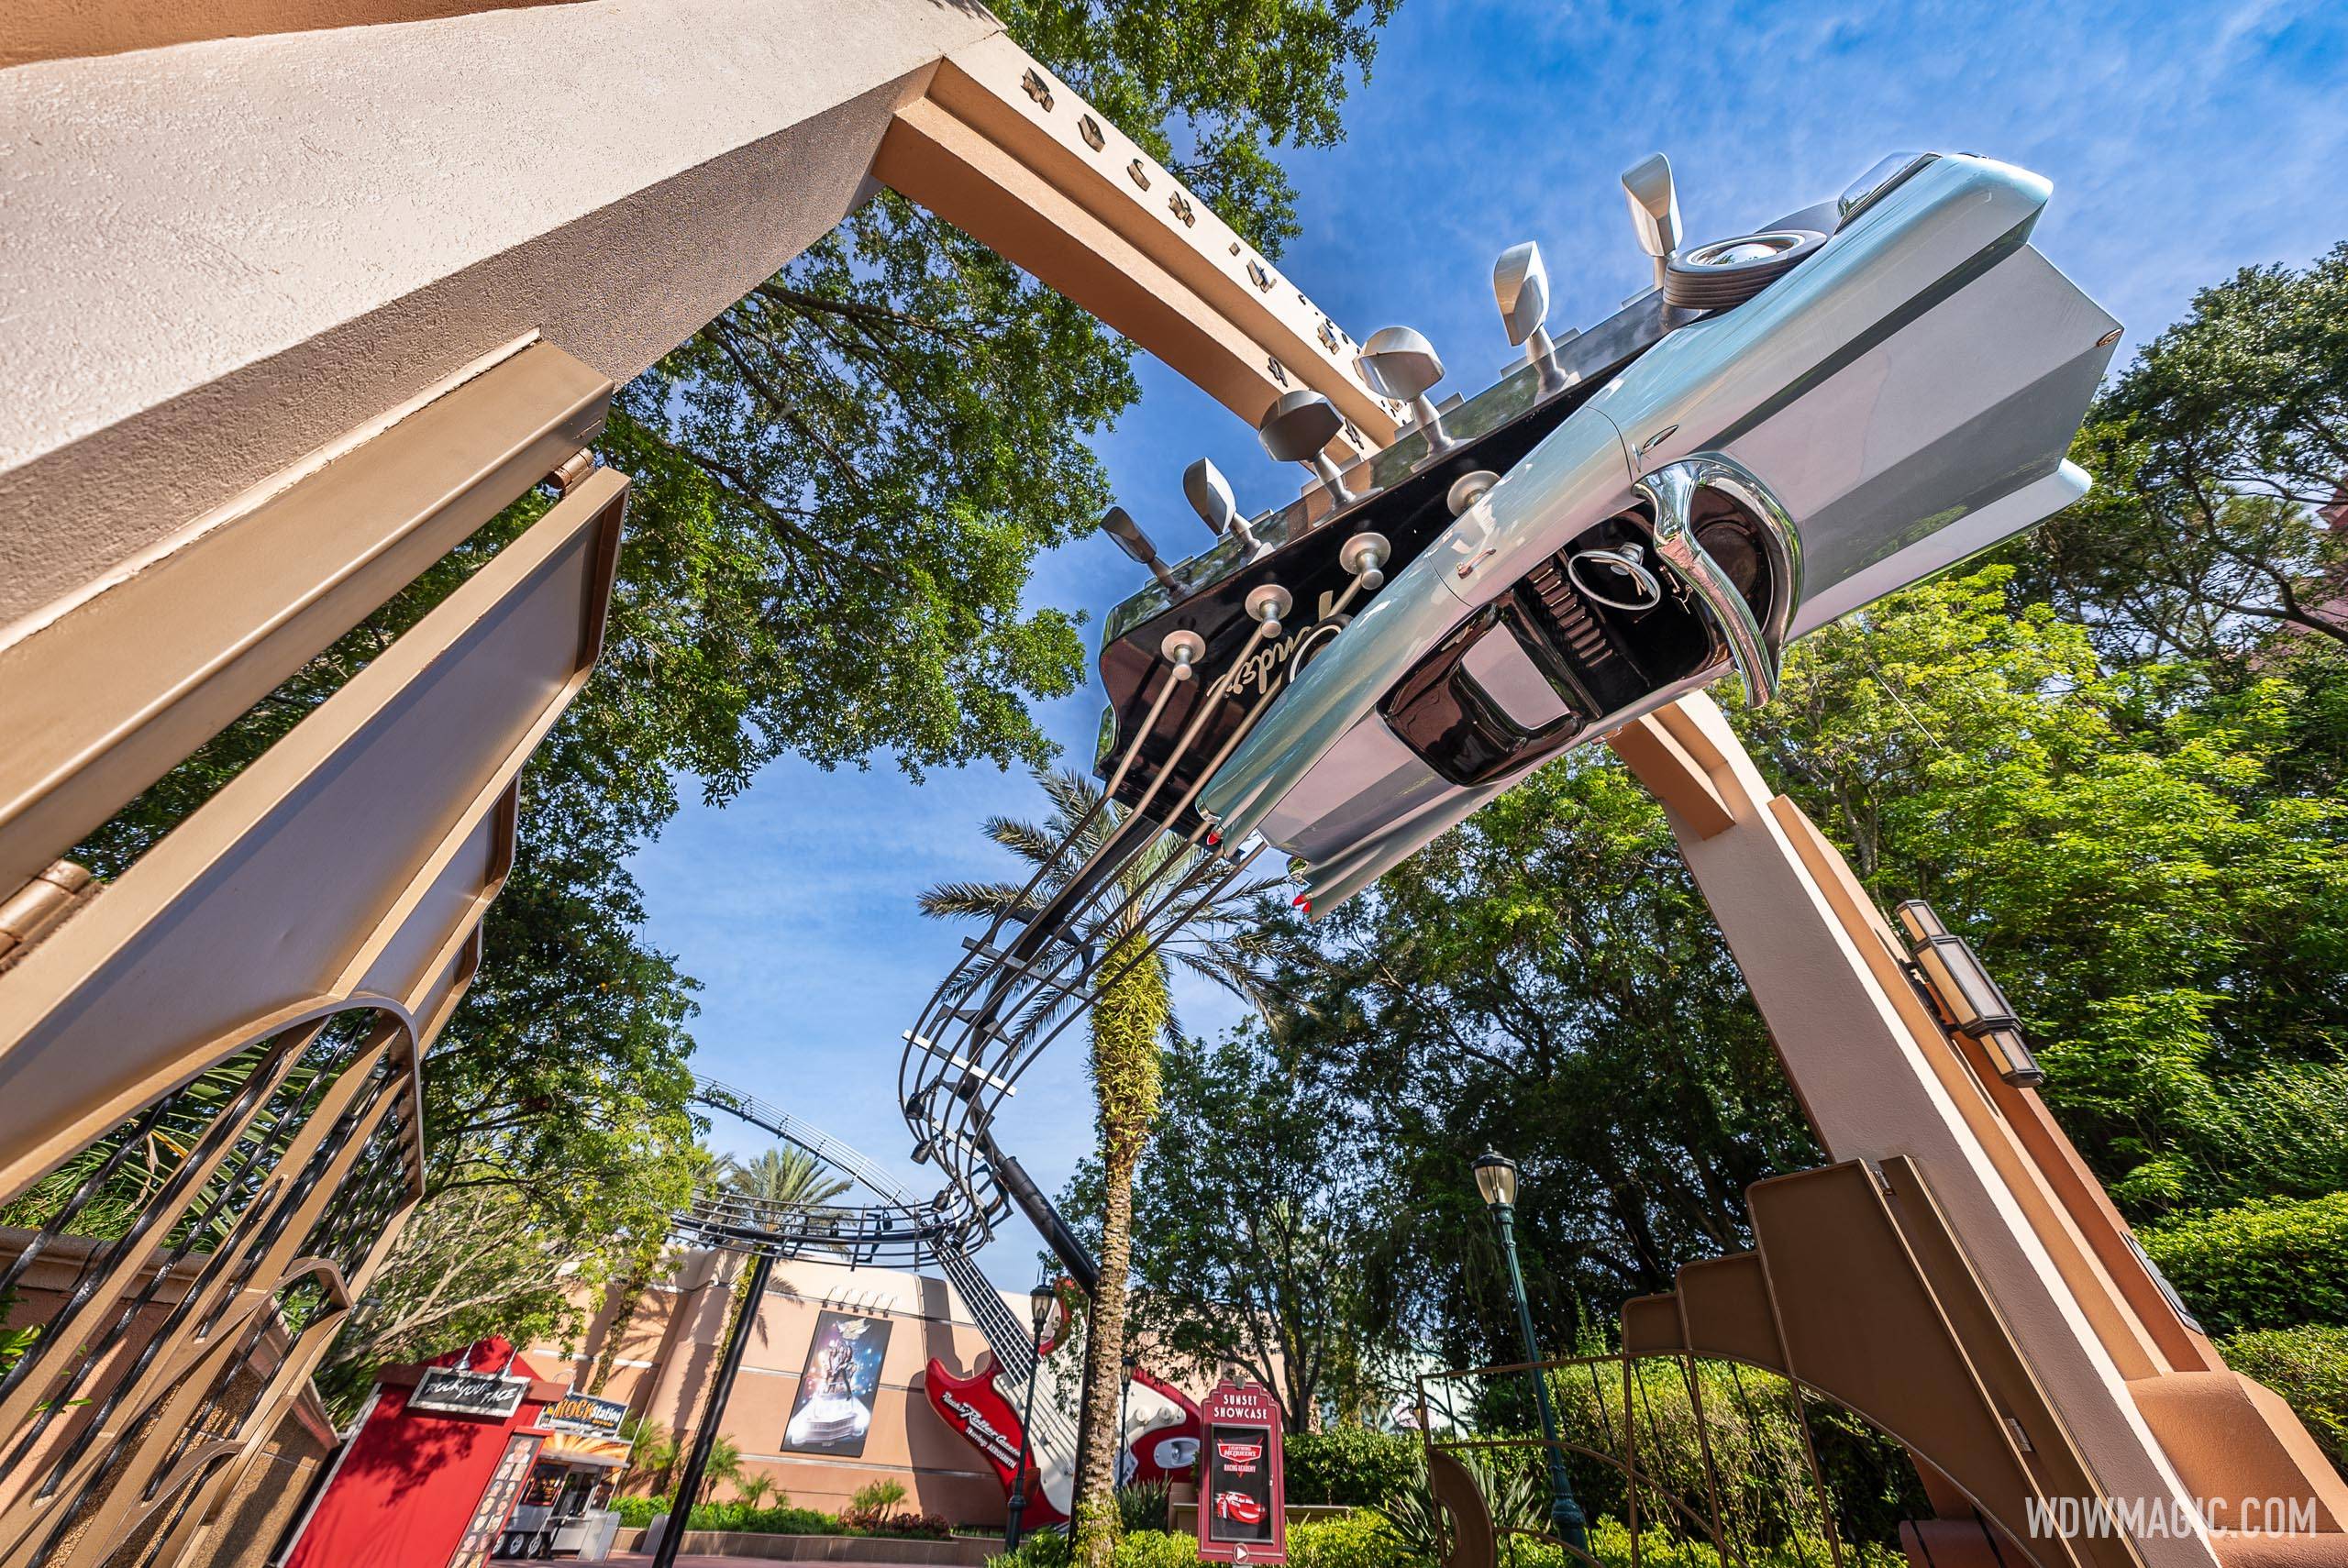 Rock 'n' Roller Coaster Unexpectedly Closed Again at Disney's Hollywood  Studios - WDW News Today